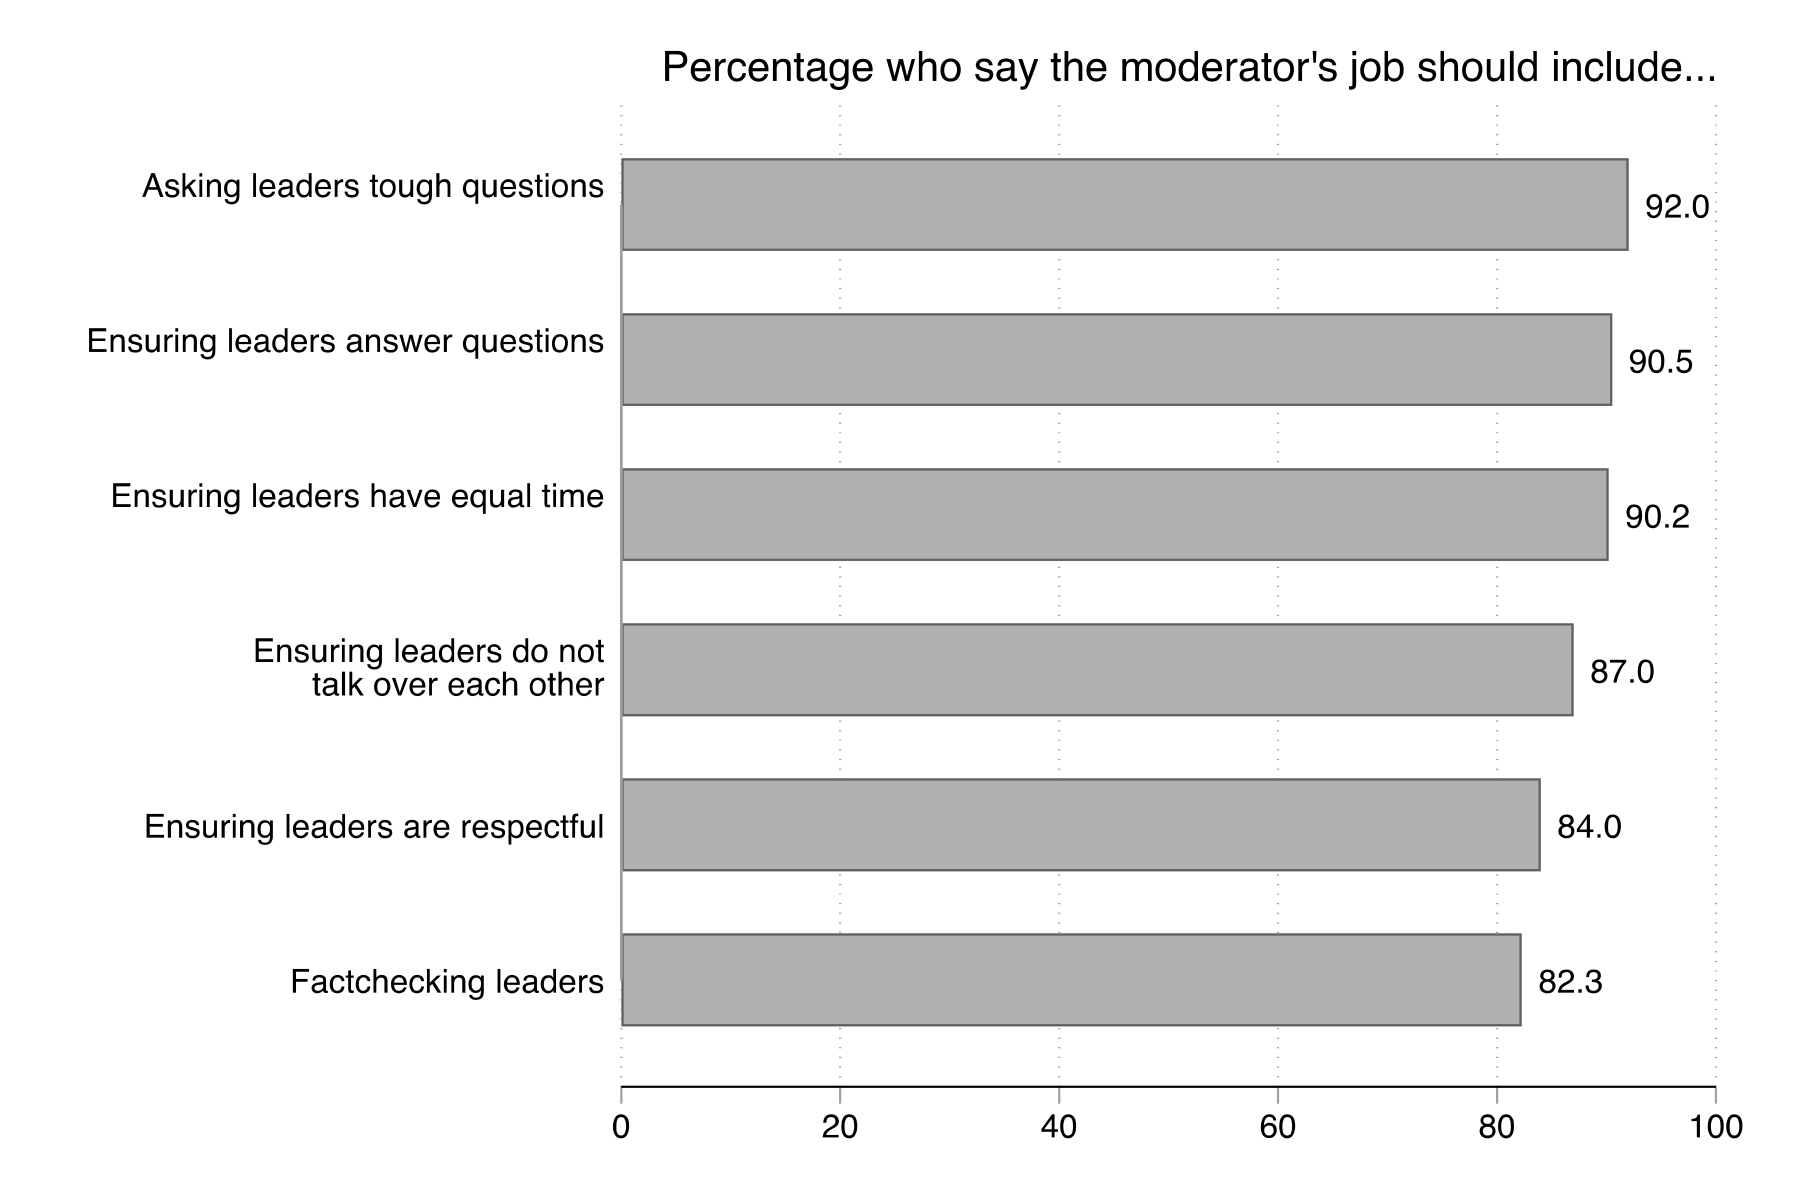 Figure 33. This figure shows participants' preferences with regards to moderator roles. A large majority of participants want the moderator to: ask tough questions of the leaders (92%); ensure that the leaders answer these questions (91%); ensure equal time among leaders (90%); ensure the leaders do not talk over each other (87%); ensure the leaders are respectful of each other (84%); and fact-check leaders' answers (82%).